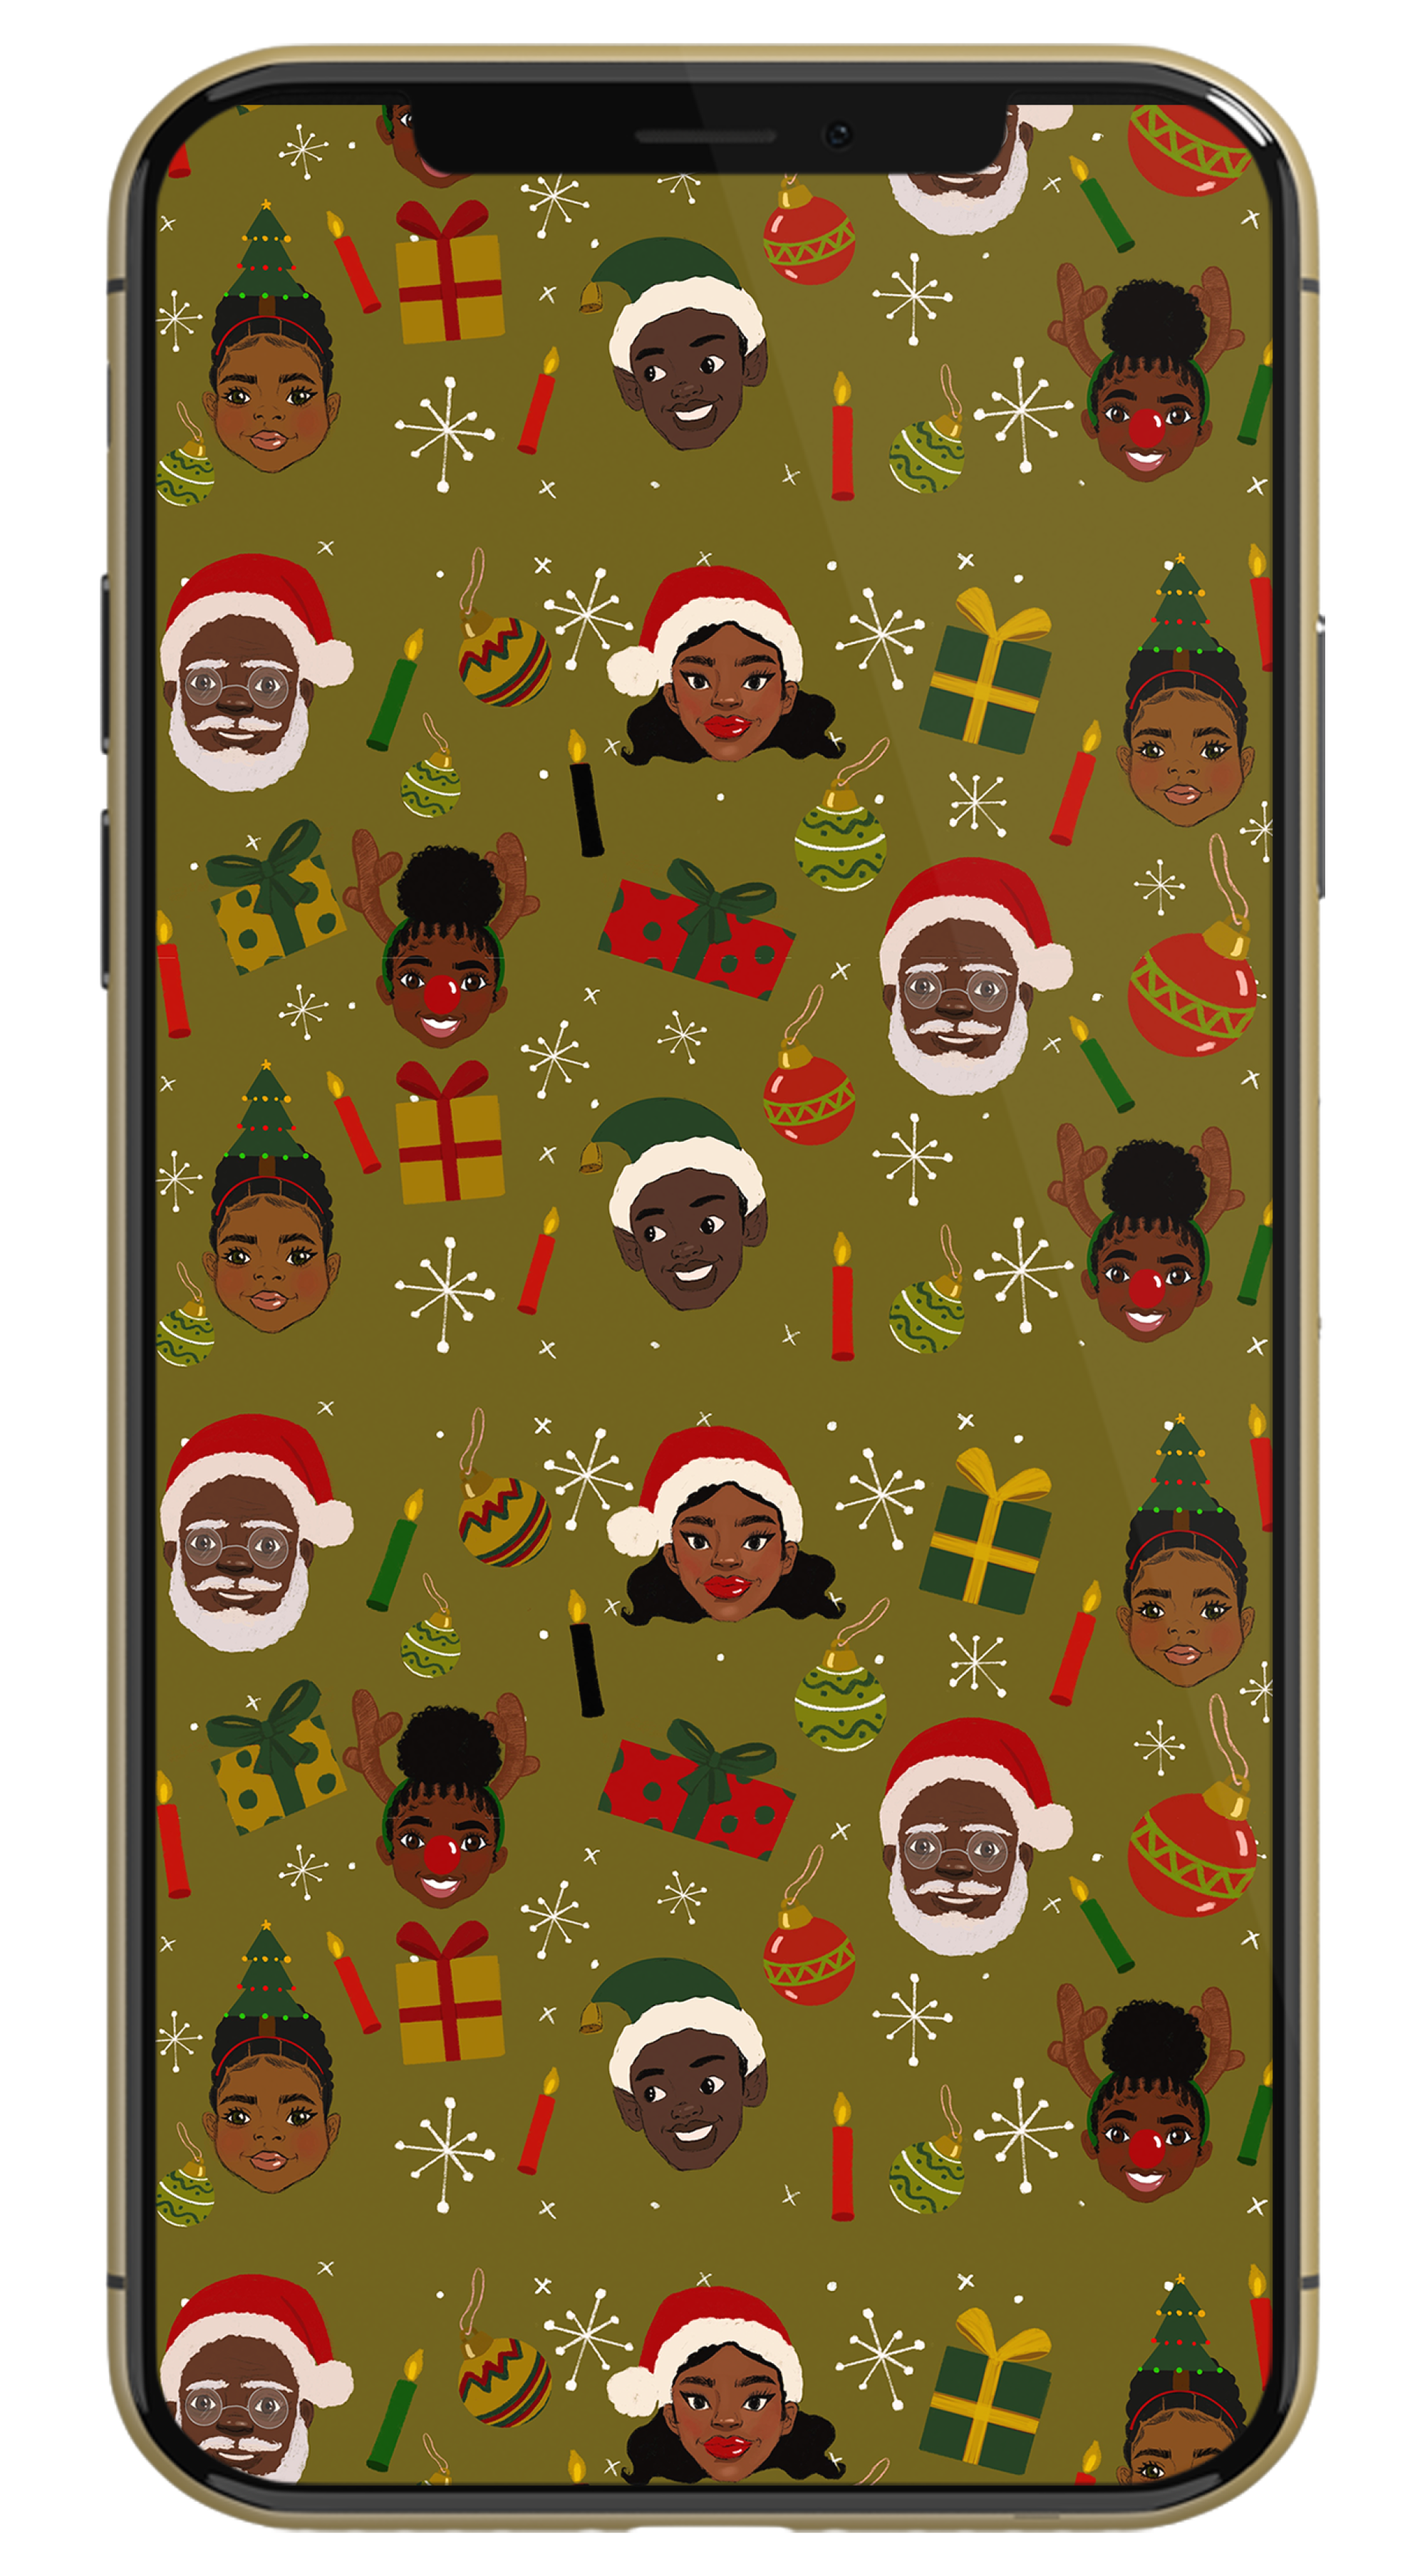 Wallpaper on an iphone wearing Santa hats, Christmas hats and reindeer ears with ornaments and presents in the background.